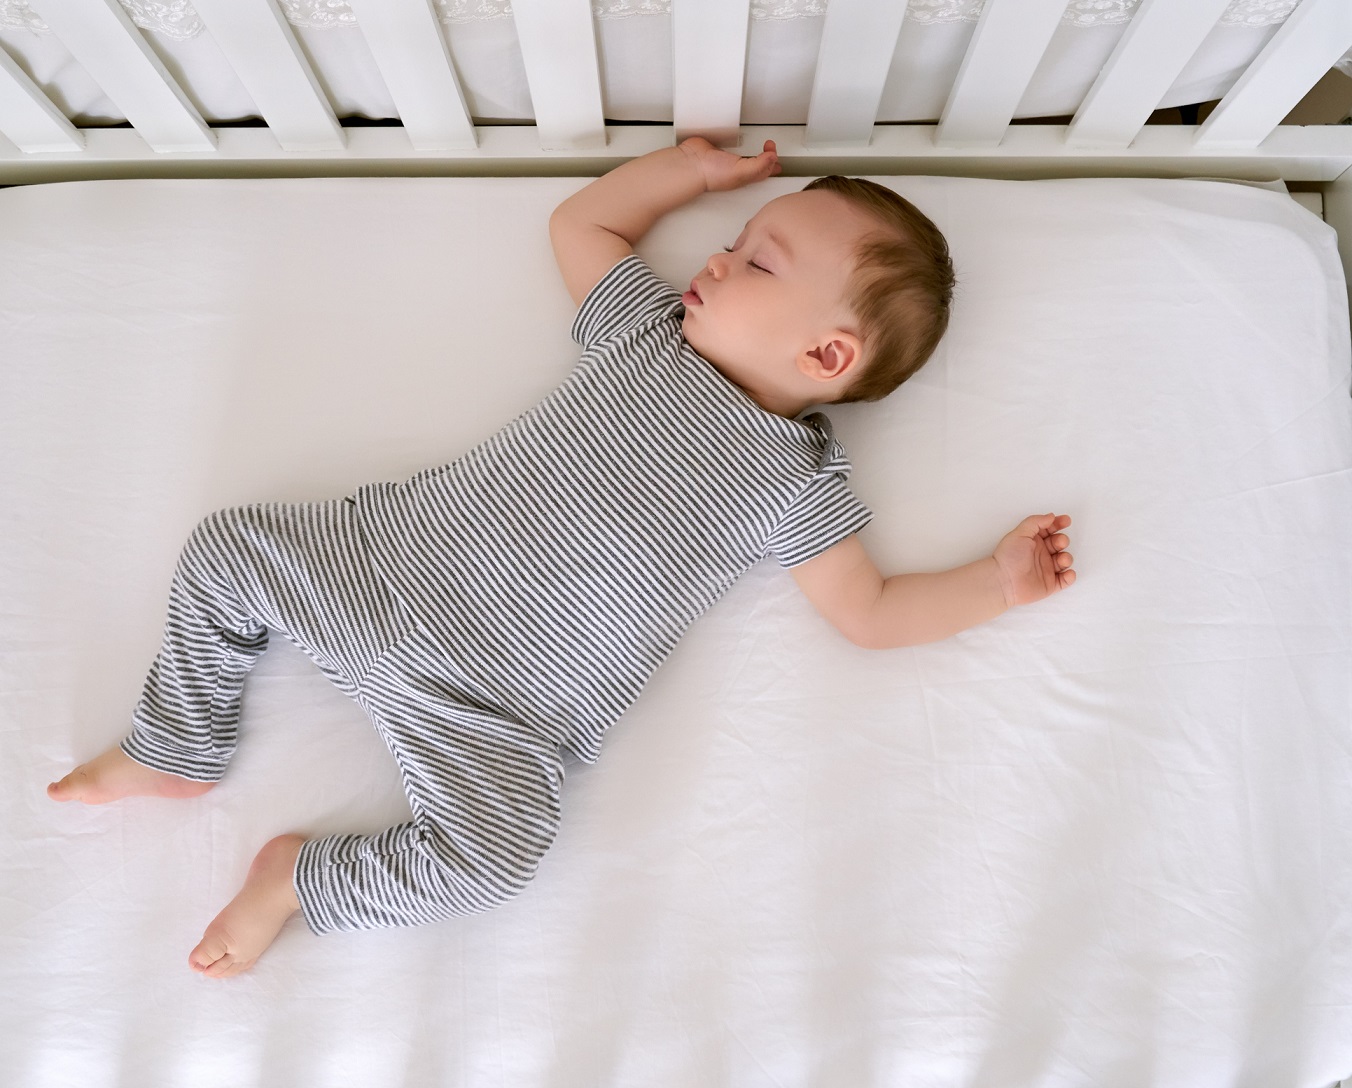 Infant Sleep Products Must Meet CPSC Safety Standards